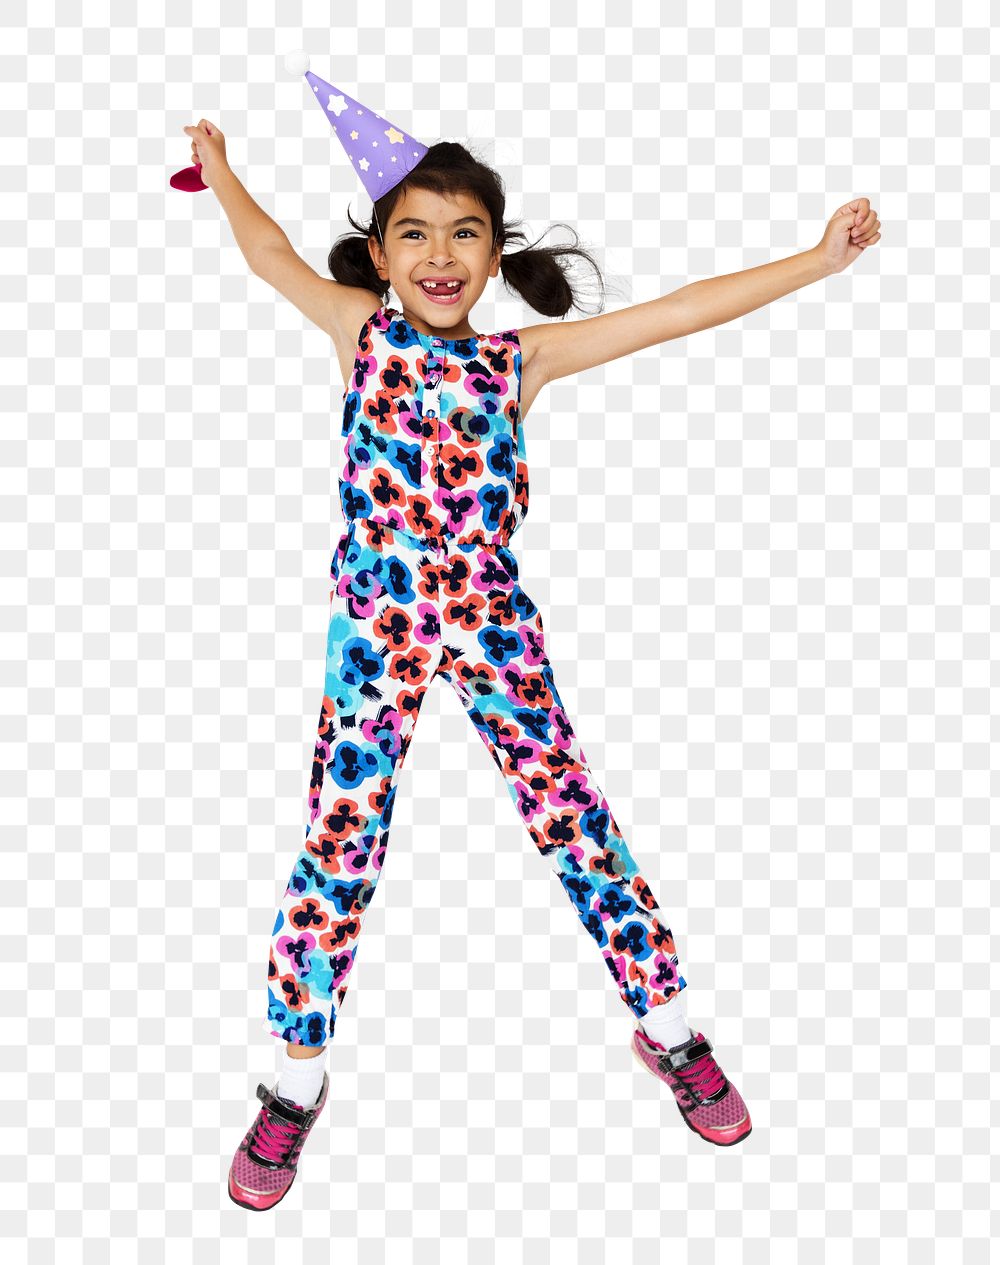 Jumping girl png party, transparent background